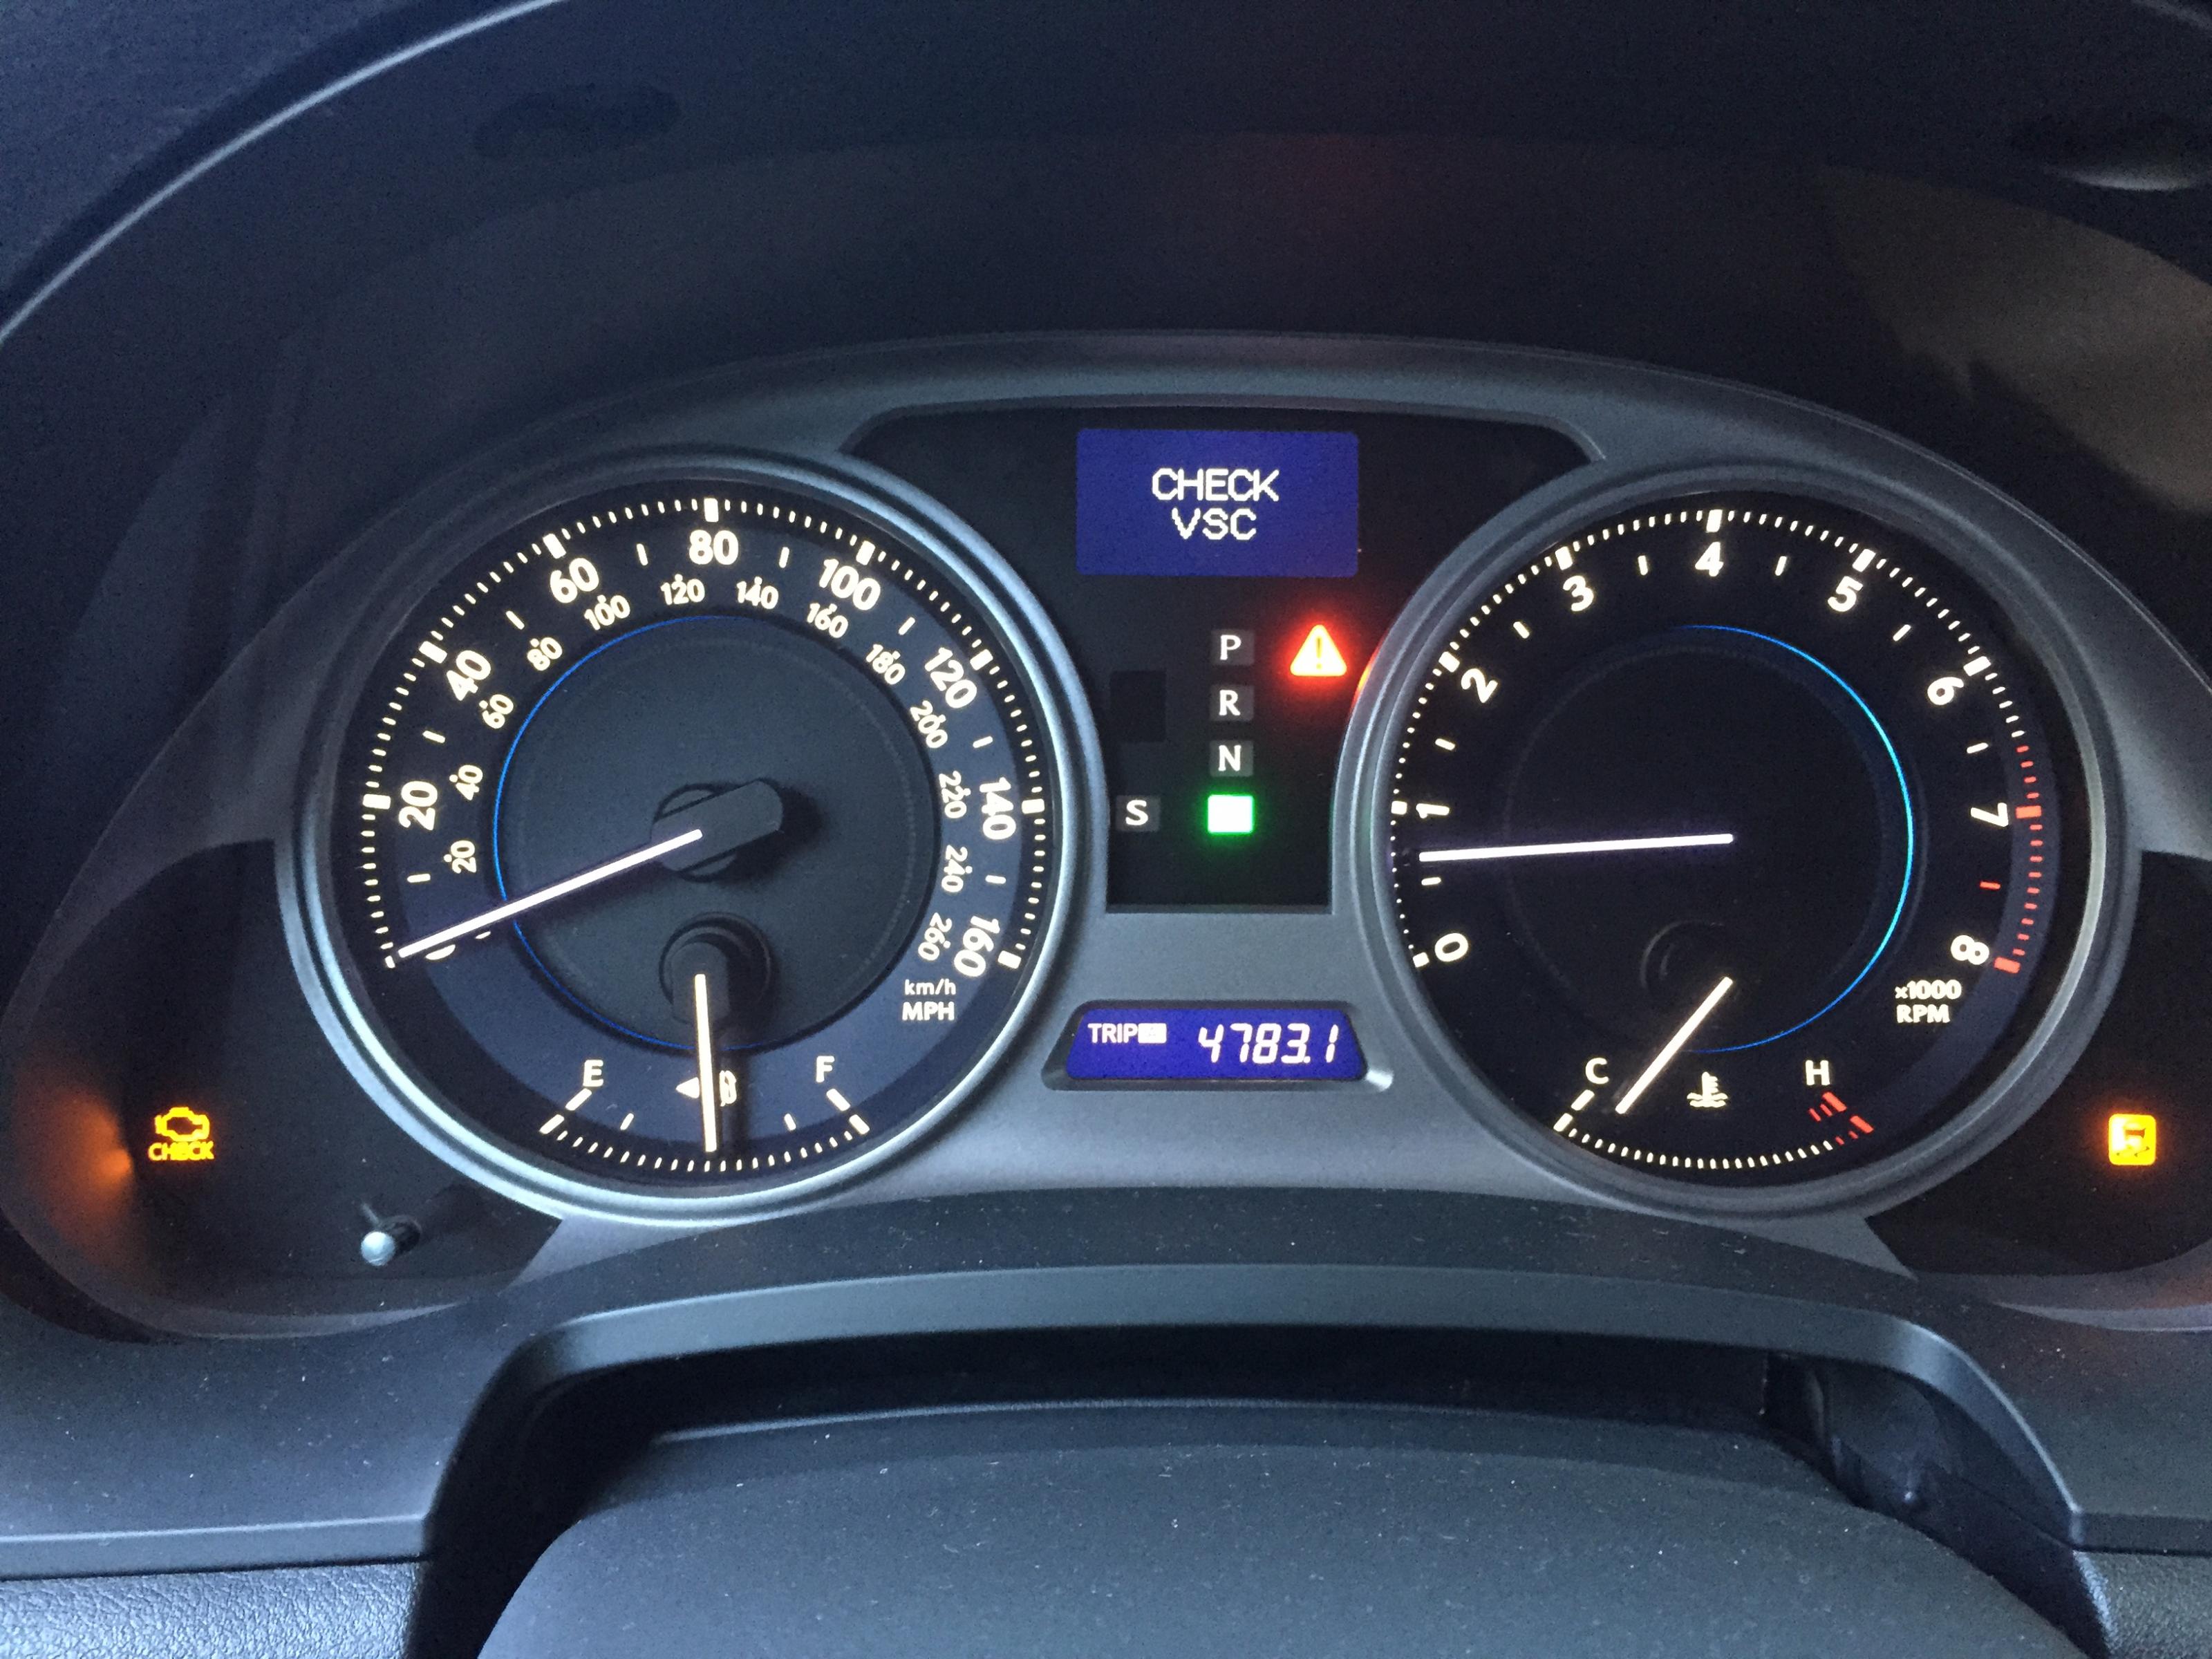 Check VSC, Traction Control, and Check Engine Lights on